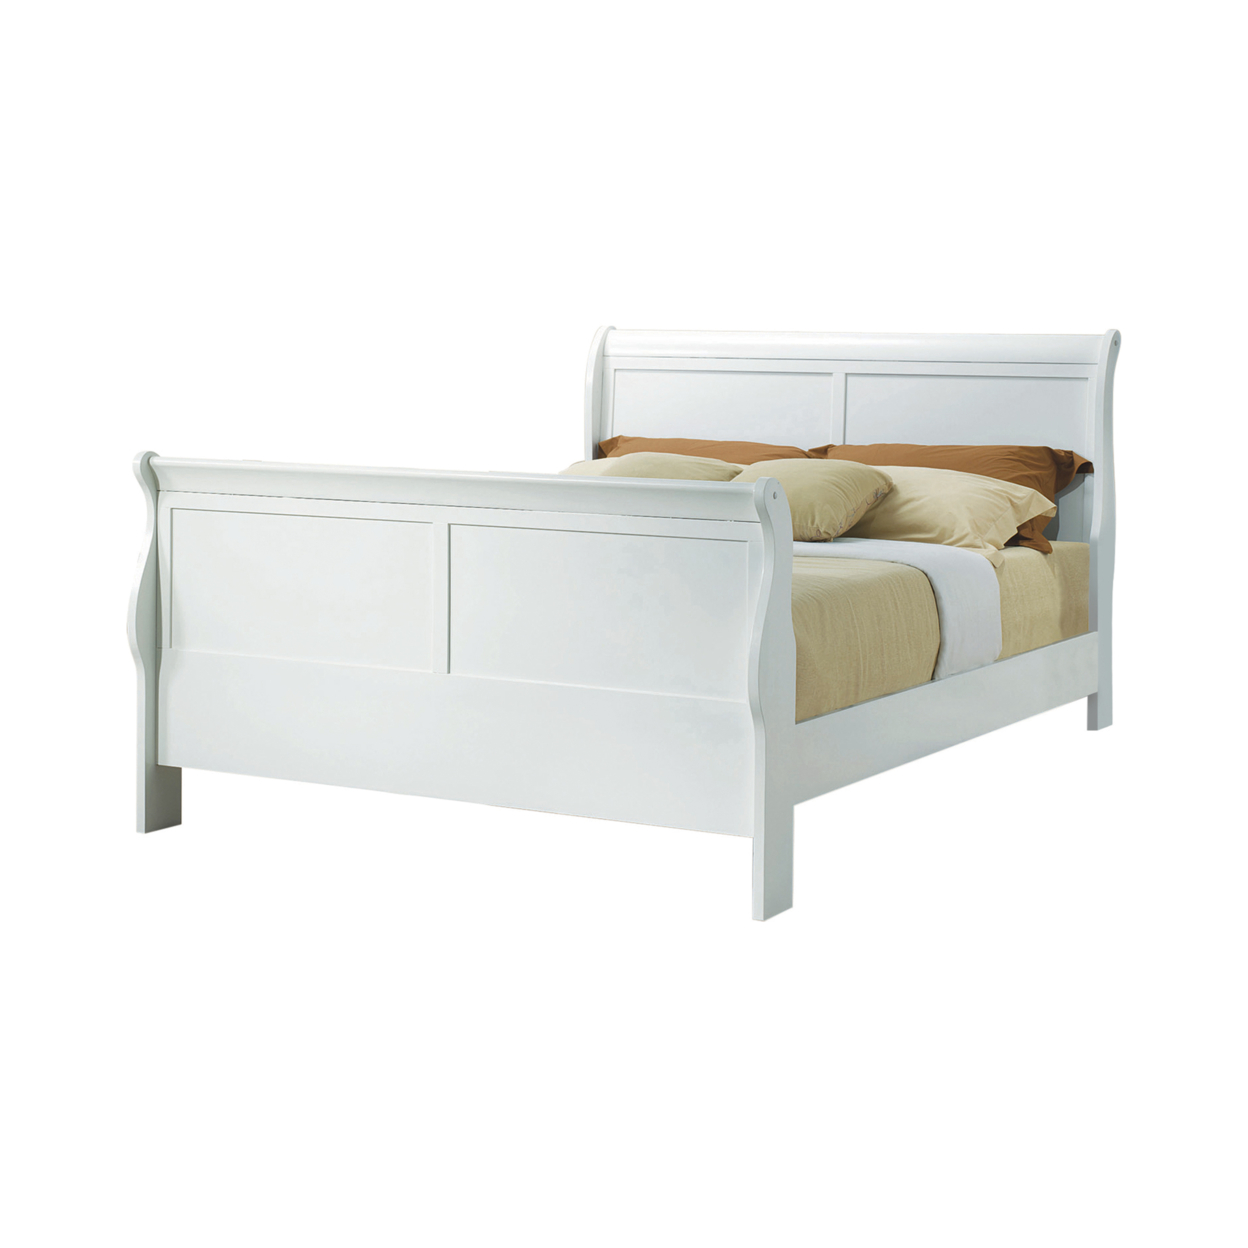 Transitional Wooden Queen Size Bed With Panel Head And Footboard, White- Saltoro Sherpi